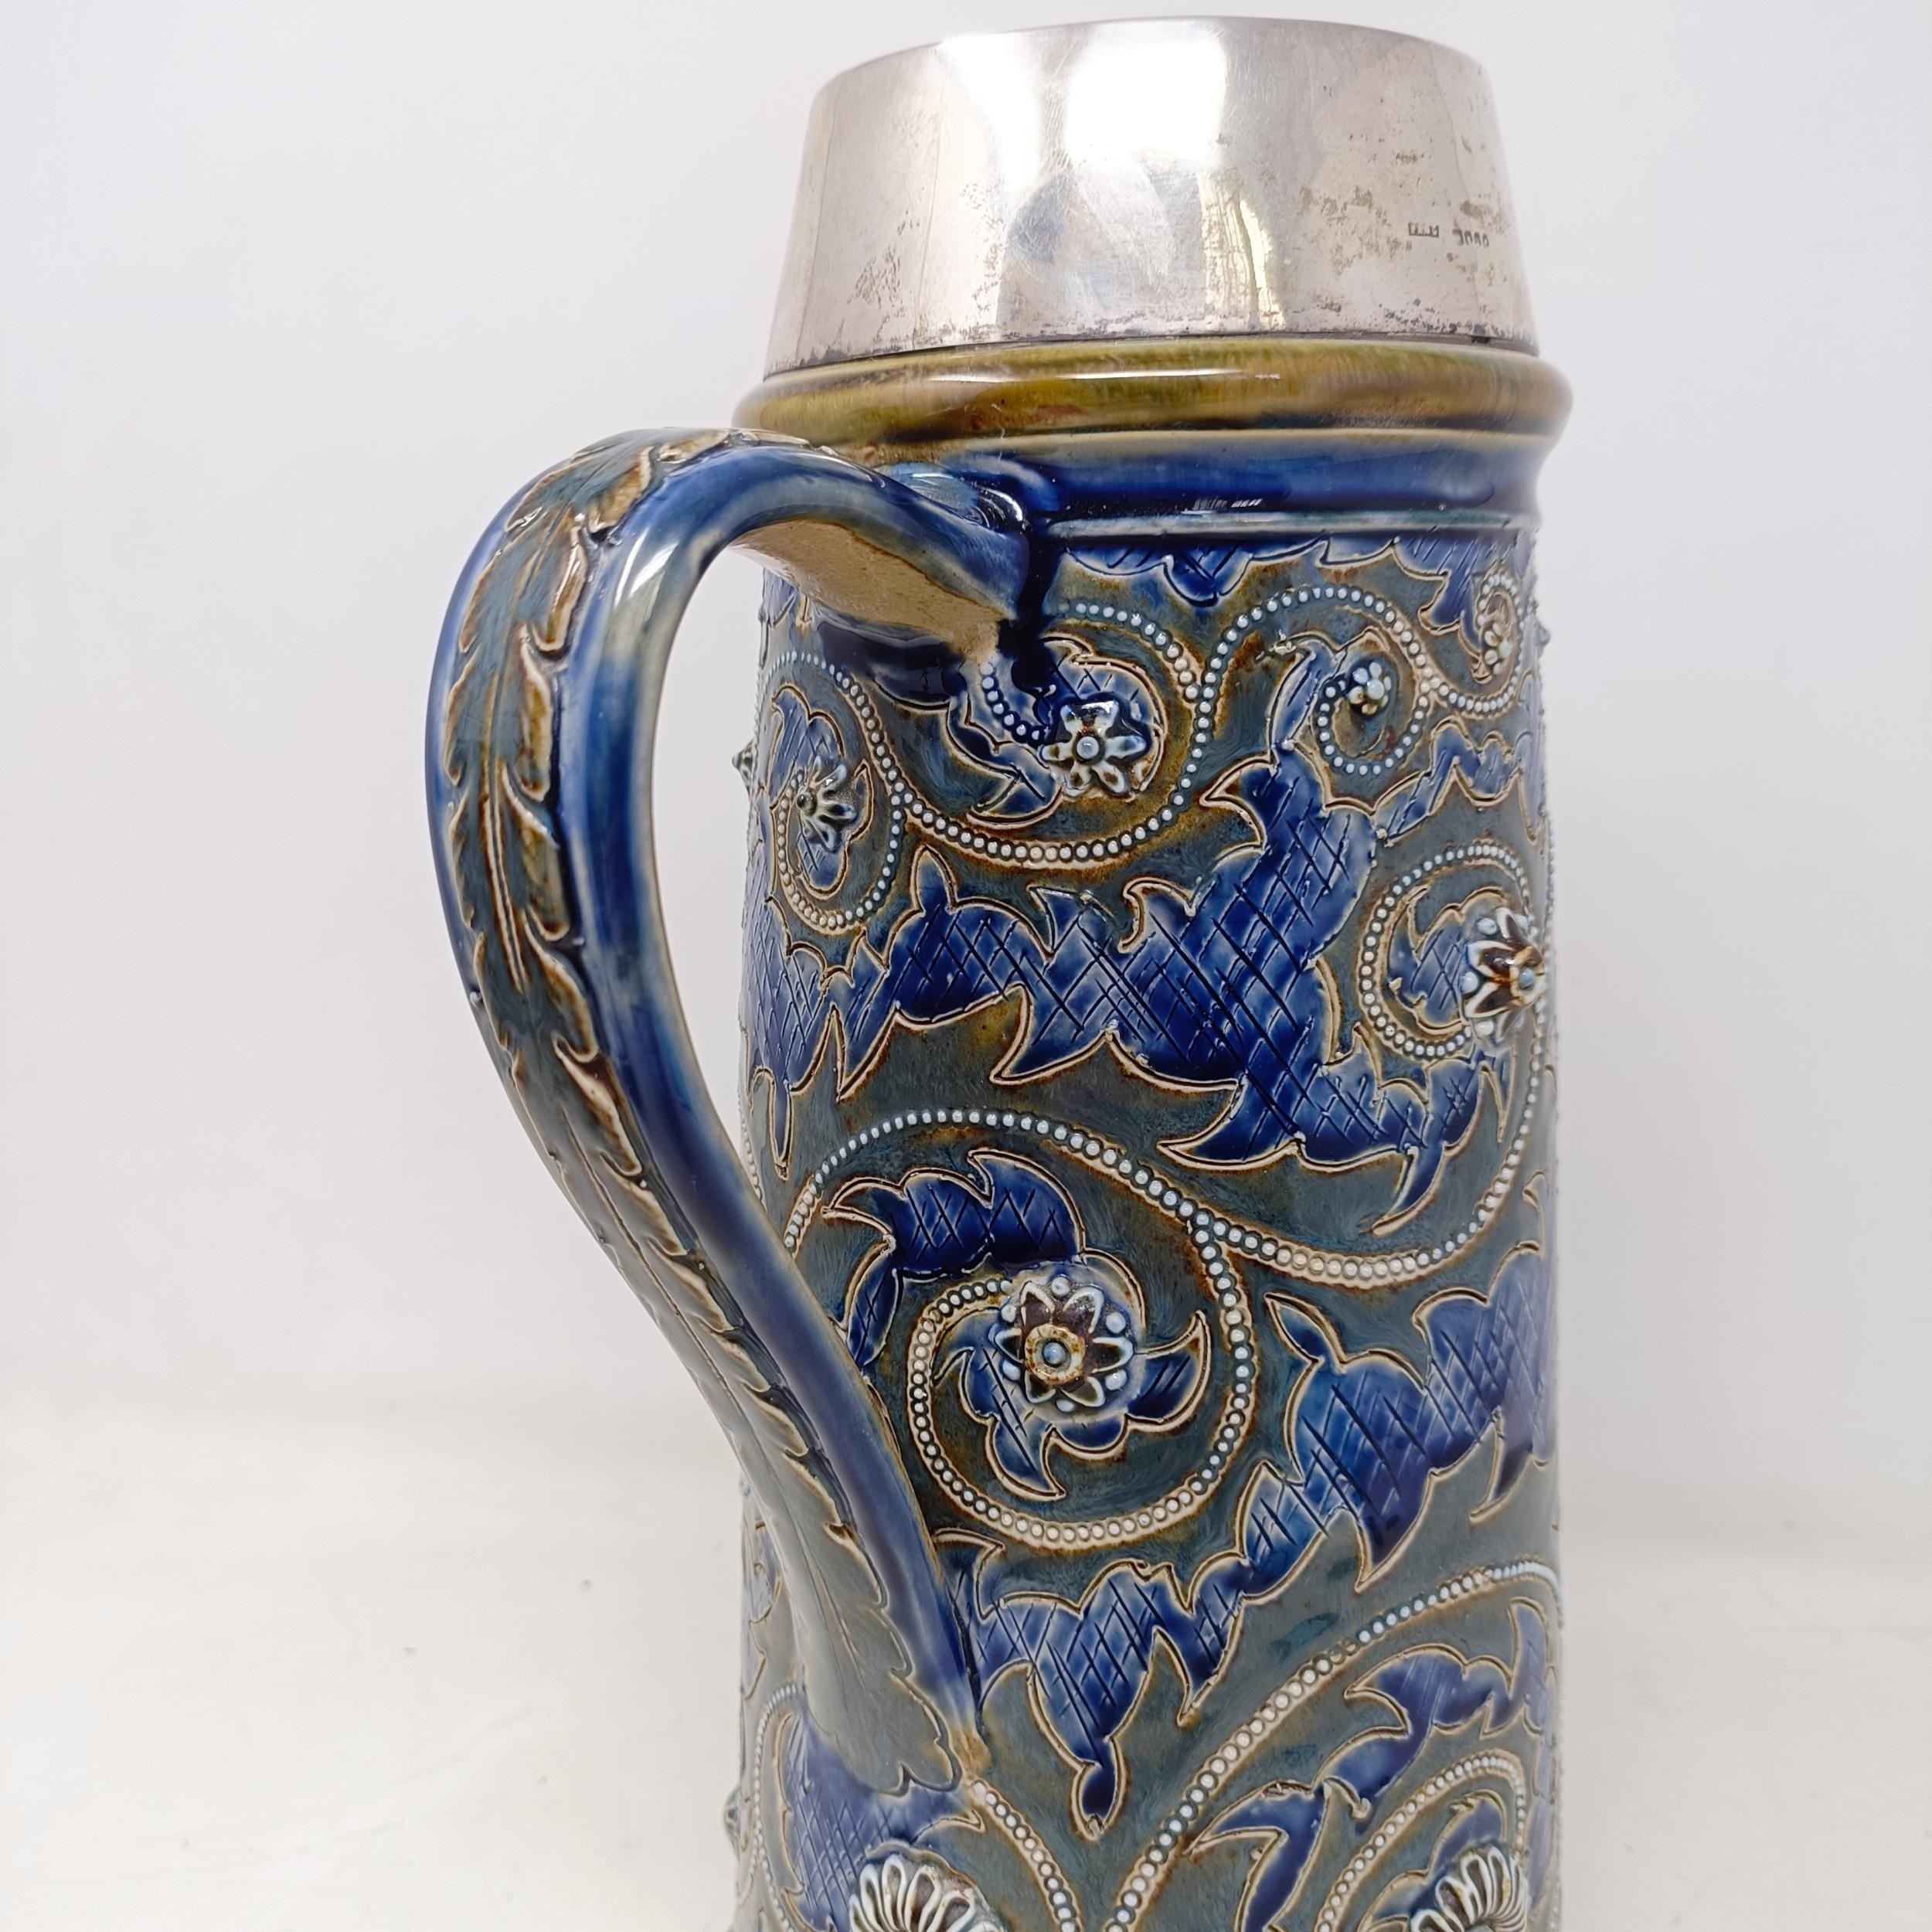 A Doulton Lambeth jug, by George Tinworth, decorated floral motifs, with a silver mount, marks - Image 2 of 11